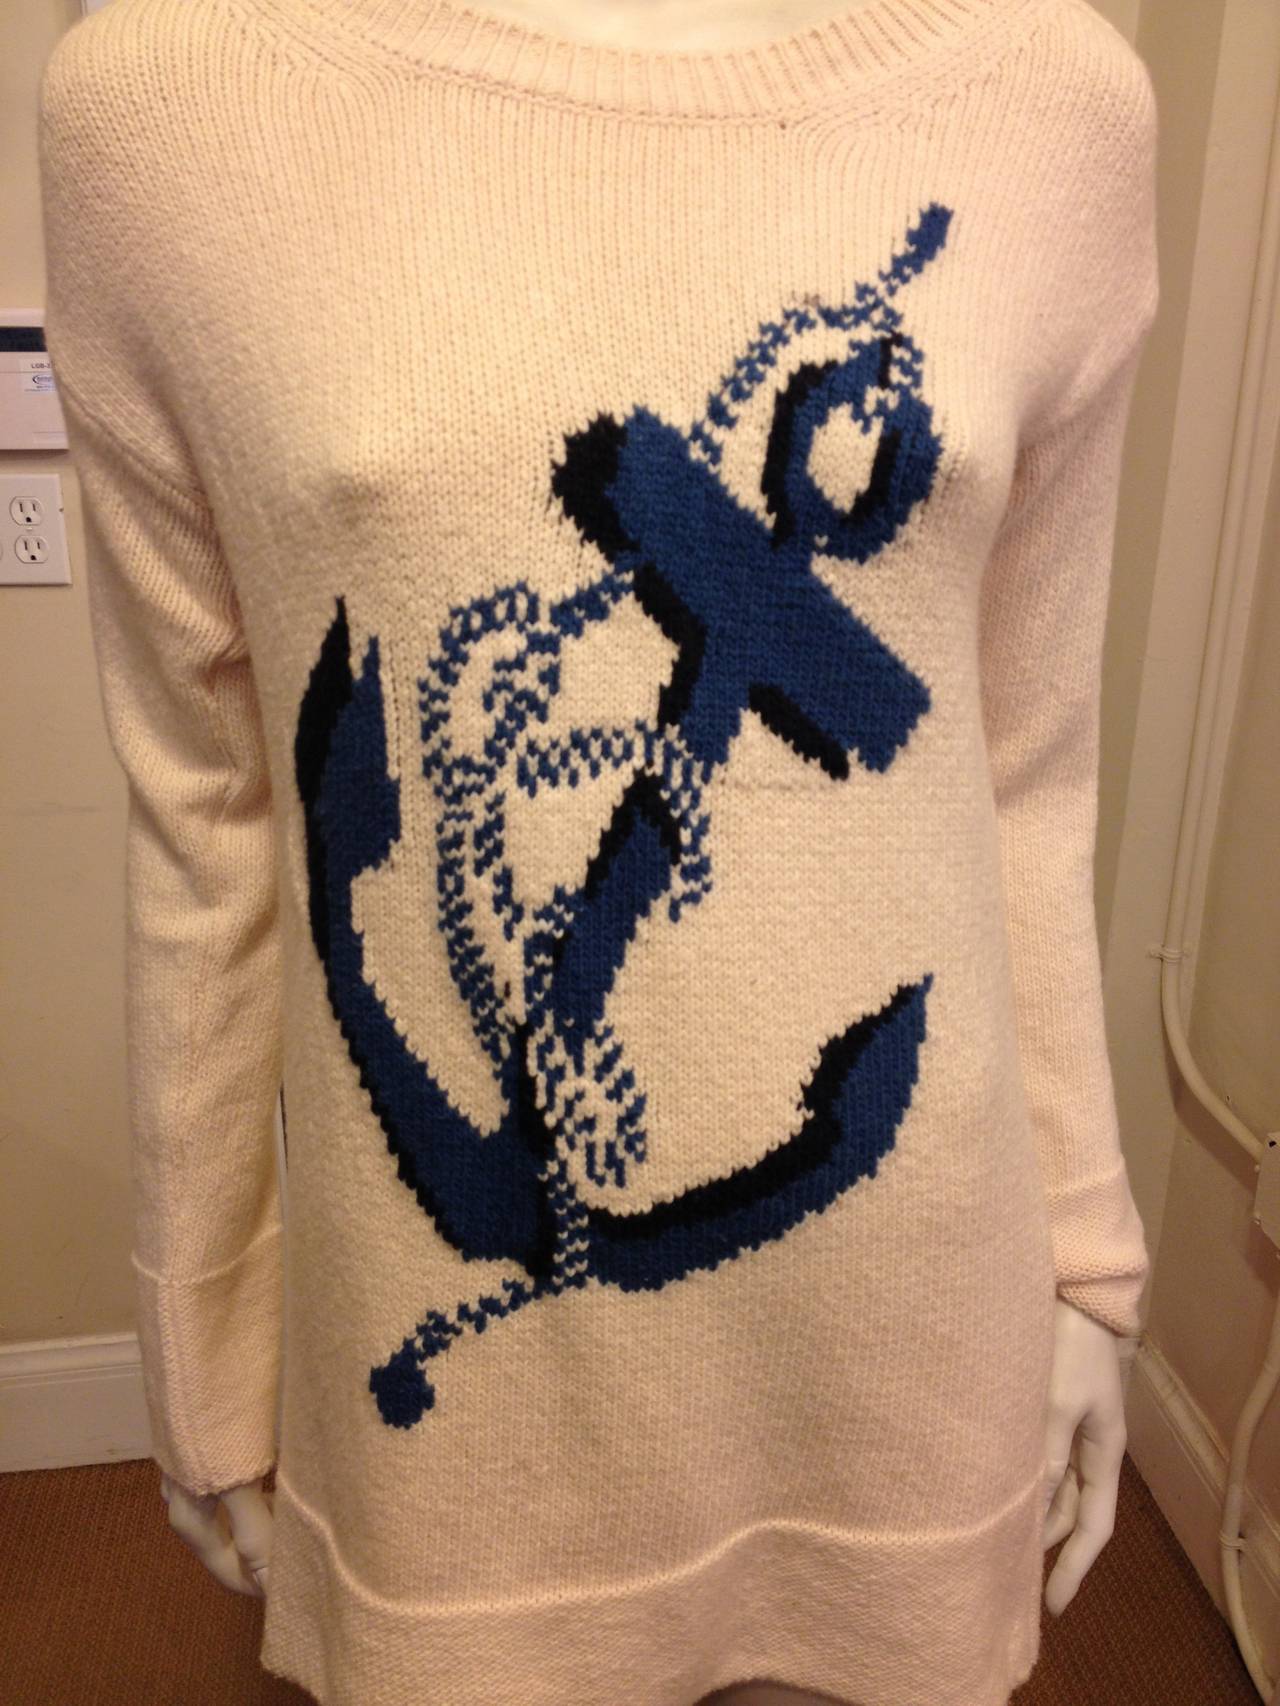 You'll never float away when you're anchored in a beautiful Stella McCartney piece like this. This sweater is a nautical dream!